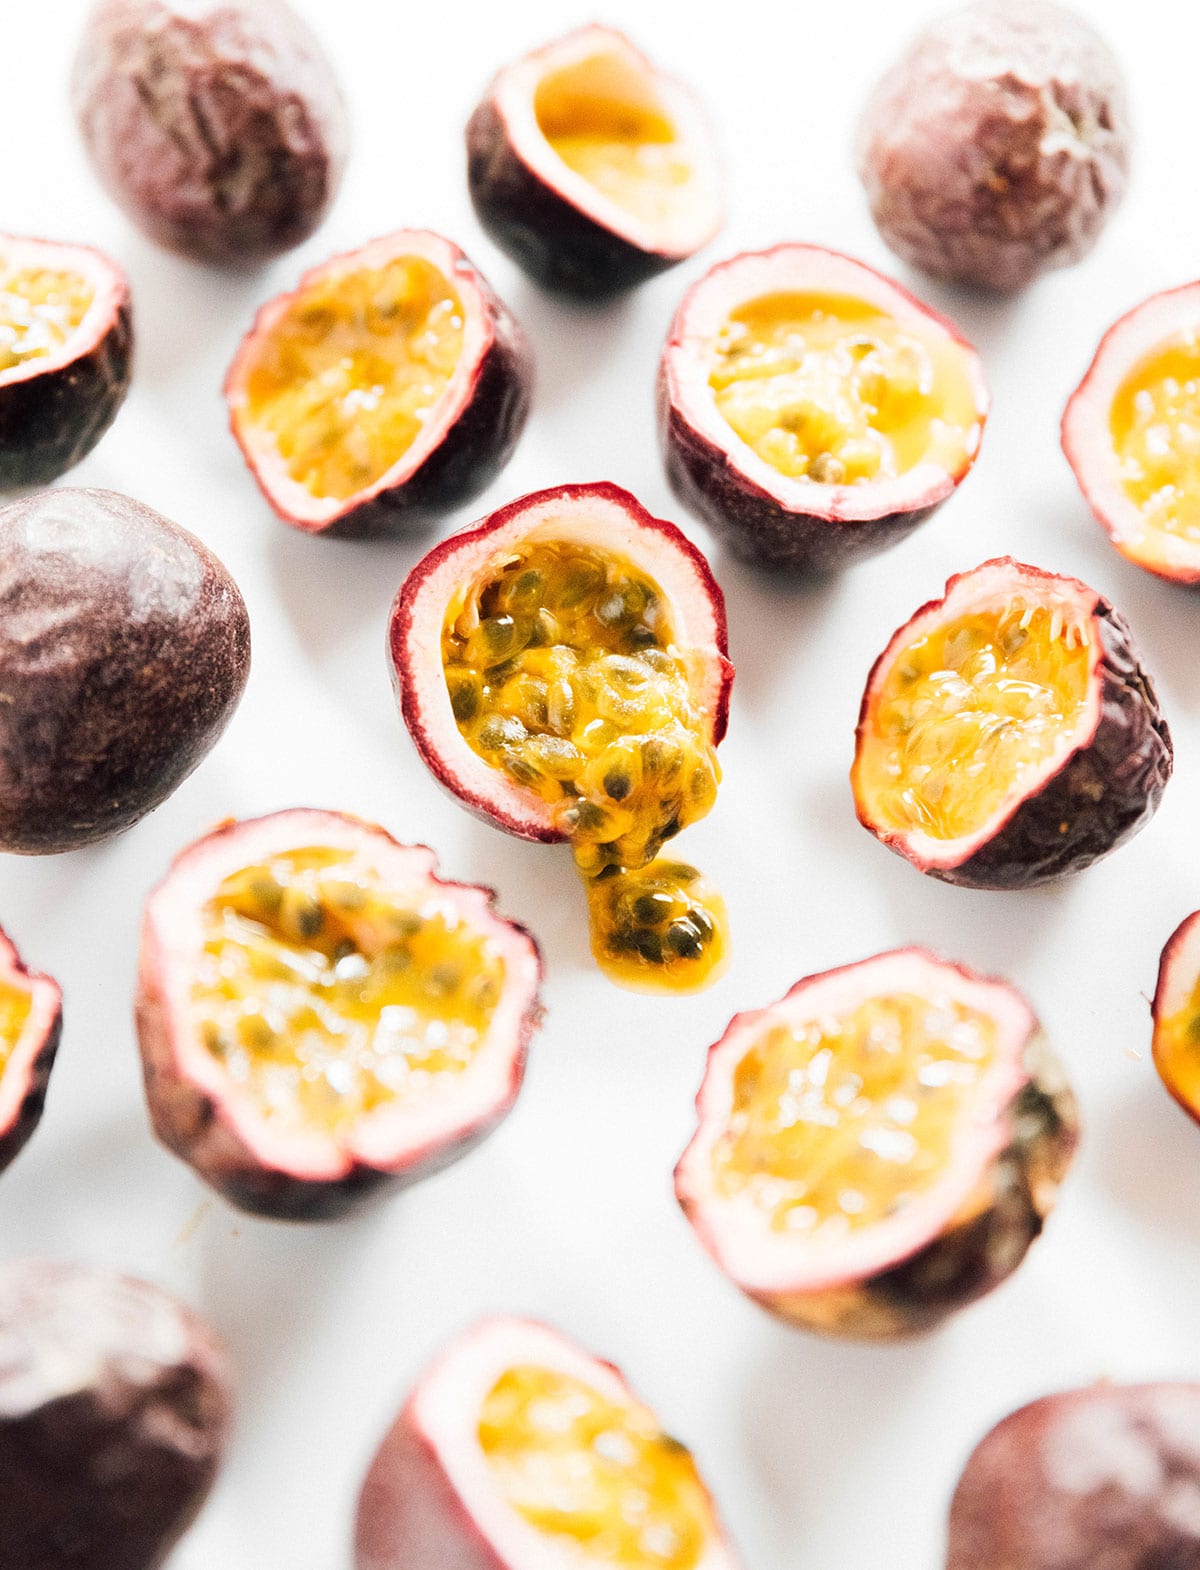 Passion fruit cut in half with the seeds coming out on a white background